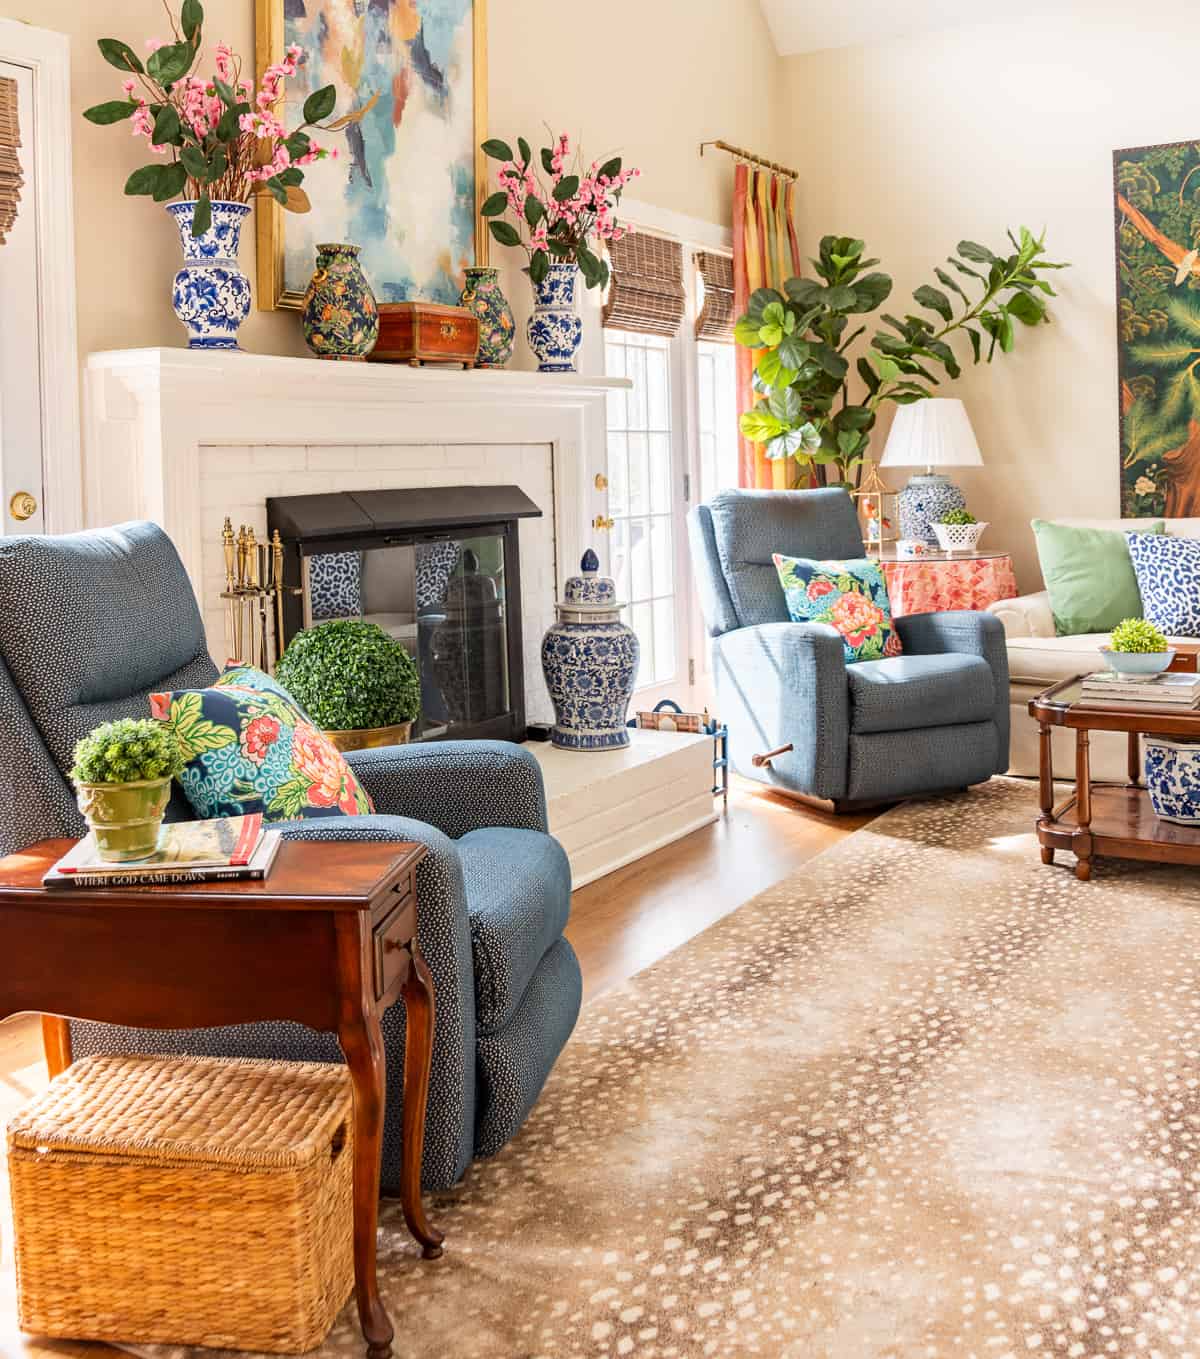 coice of antelope area rug in front of fireplace in a living room decorated in new traditional style with blue recliners, wood tables, colorful accessories